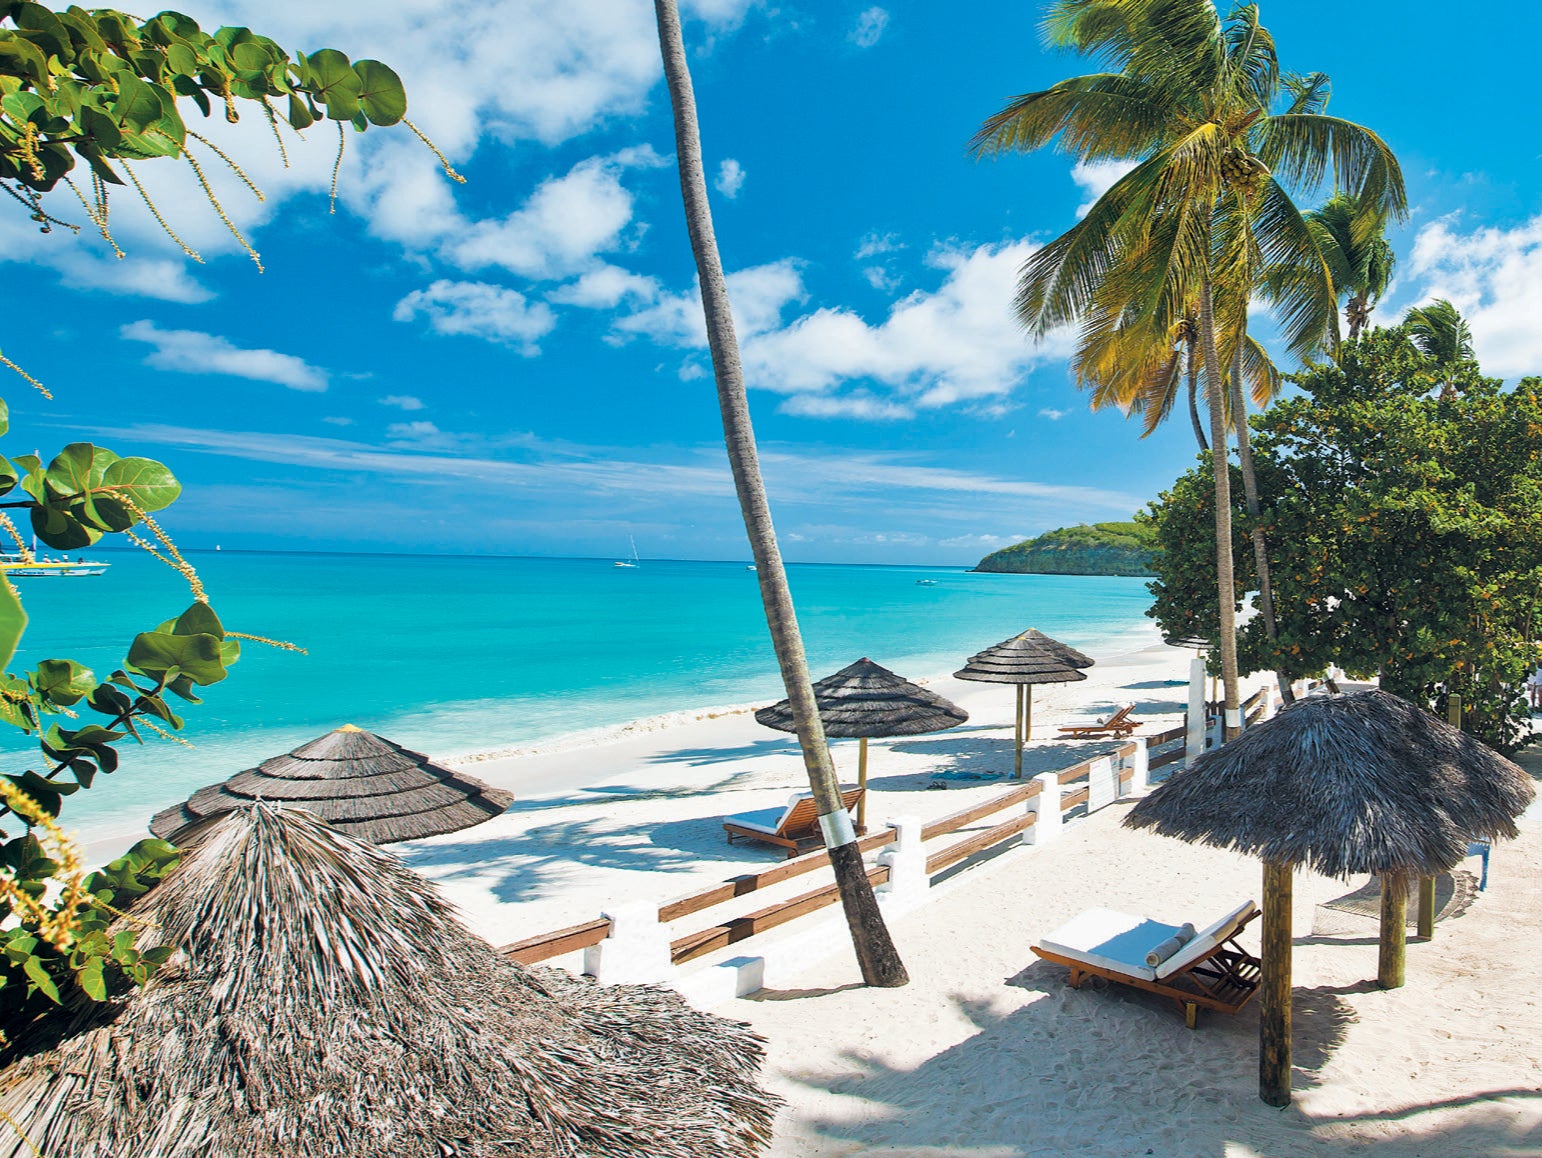 Save up to £150 on all-in getaways to the Caribbean with Sandals